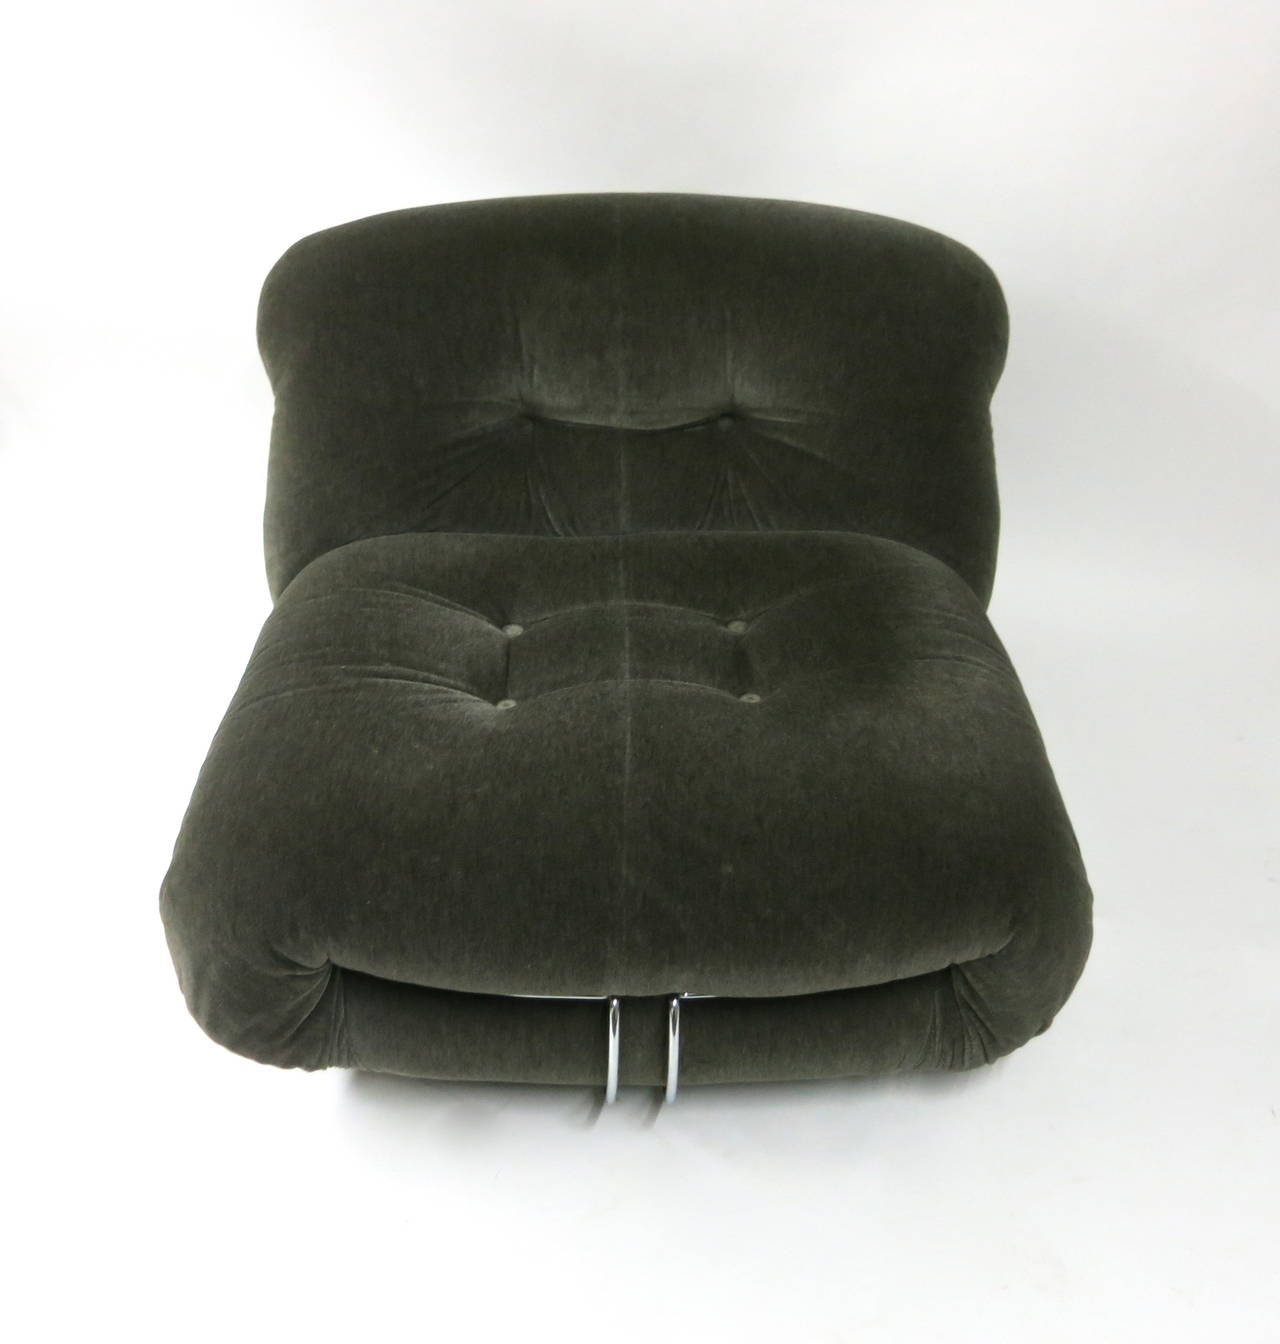 Chair with ottoman in original dark grey fabric. The chair has original casters on the back and feet in the front. The ottoman has all four original casters. Set was well cared for some very minor scuffs on the fabric. If you like original vintage